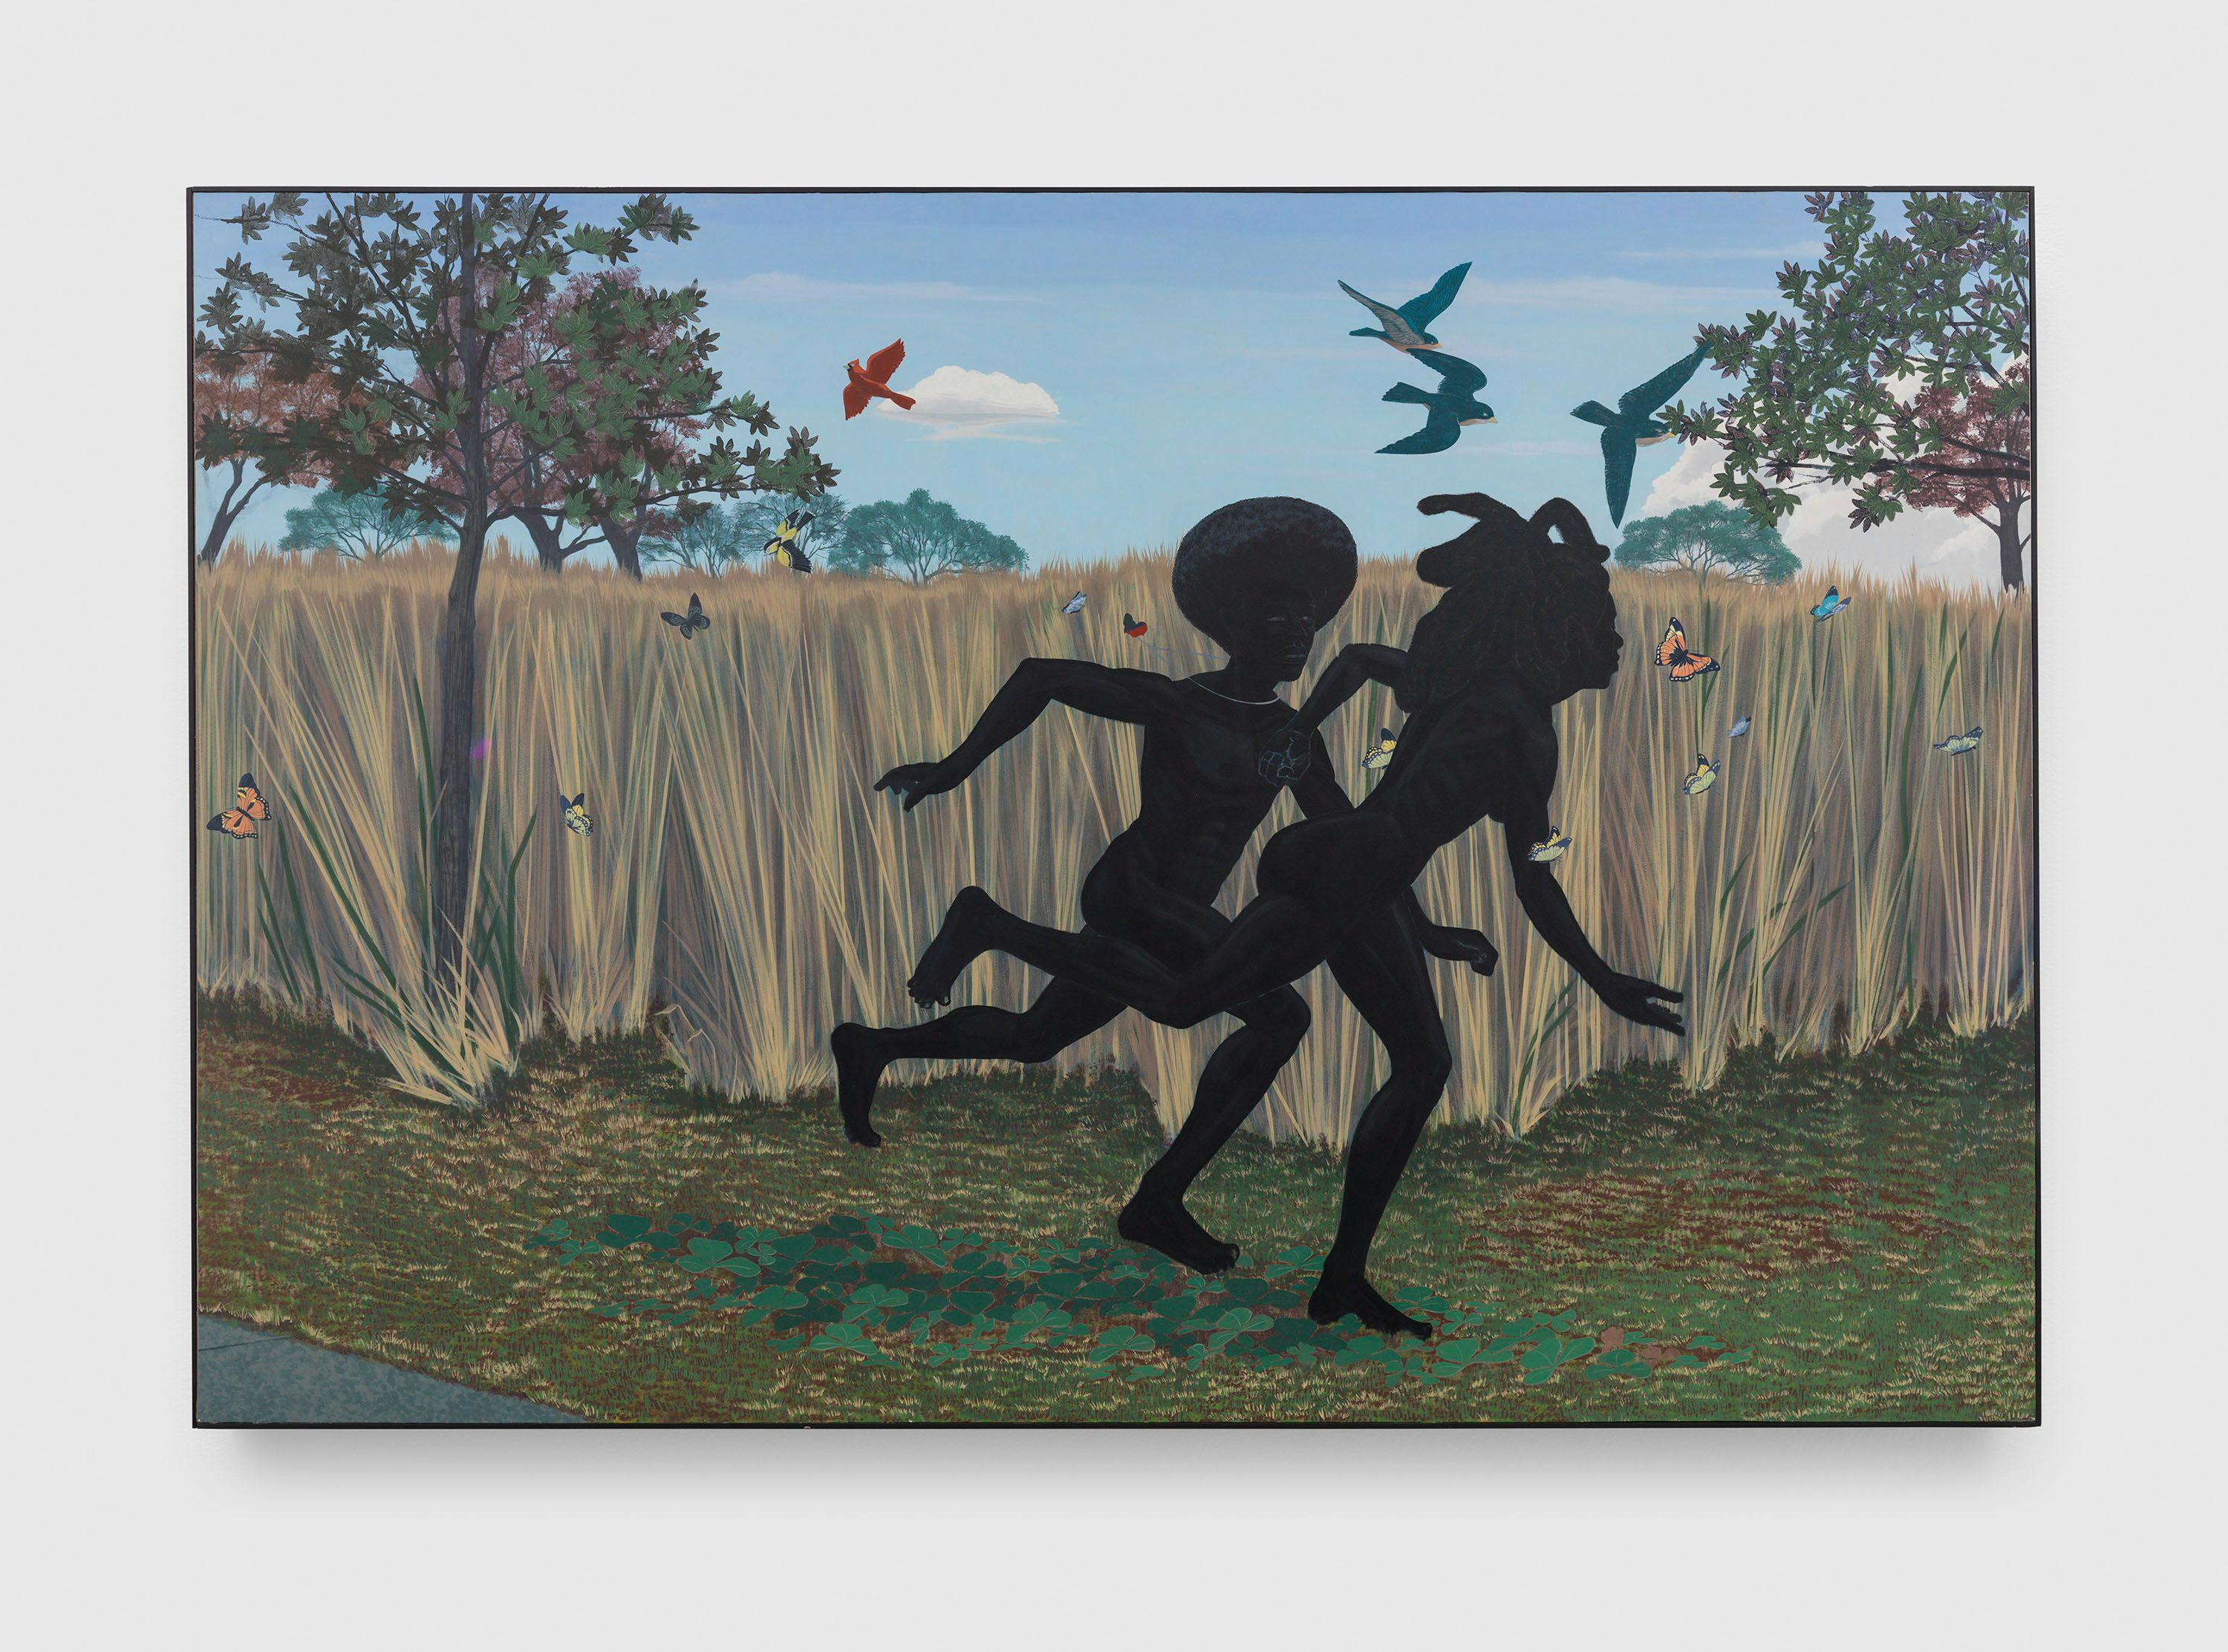 A painting by Kerry James Marshall, titled Vignette, dated 2003.